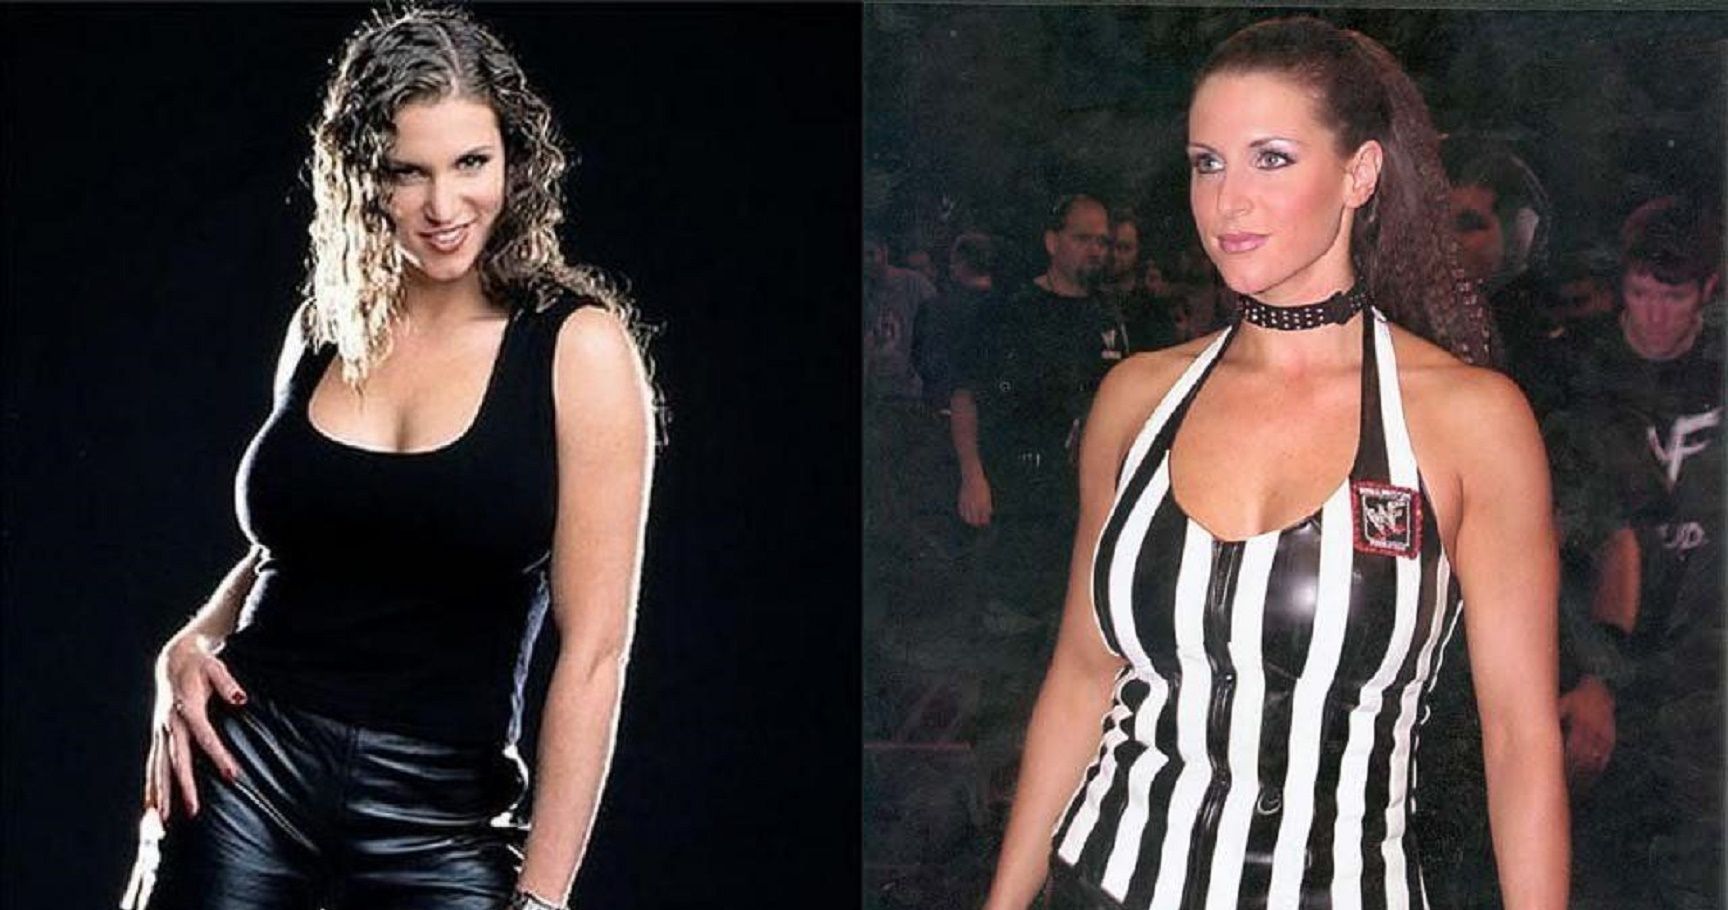 Ww Wwe Stephanie Mcmahon Sex Videos - Top 20 Hot Pictures of Stephanie McMahon You NEED to See